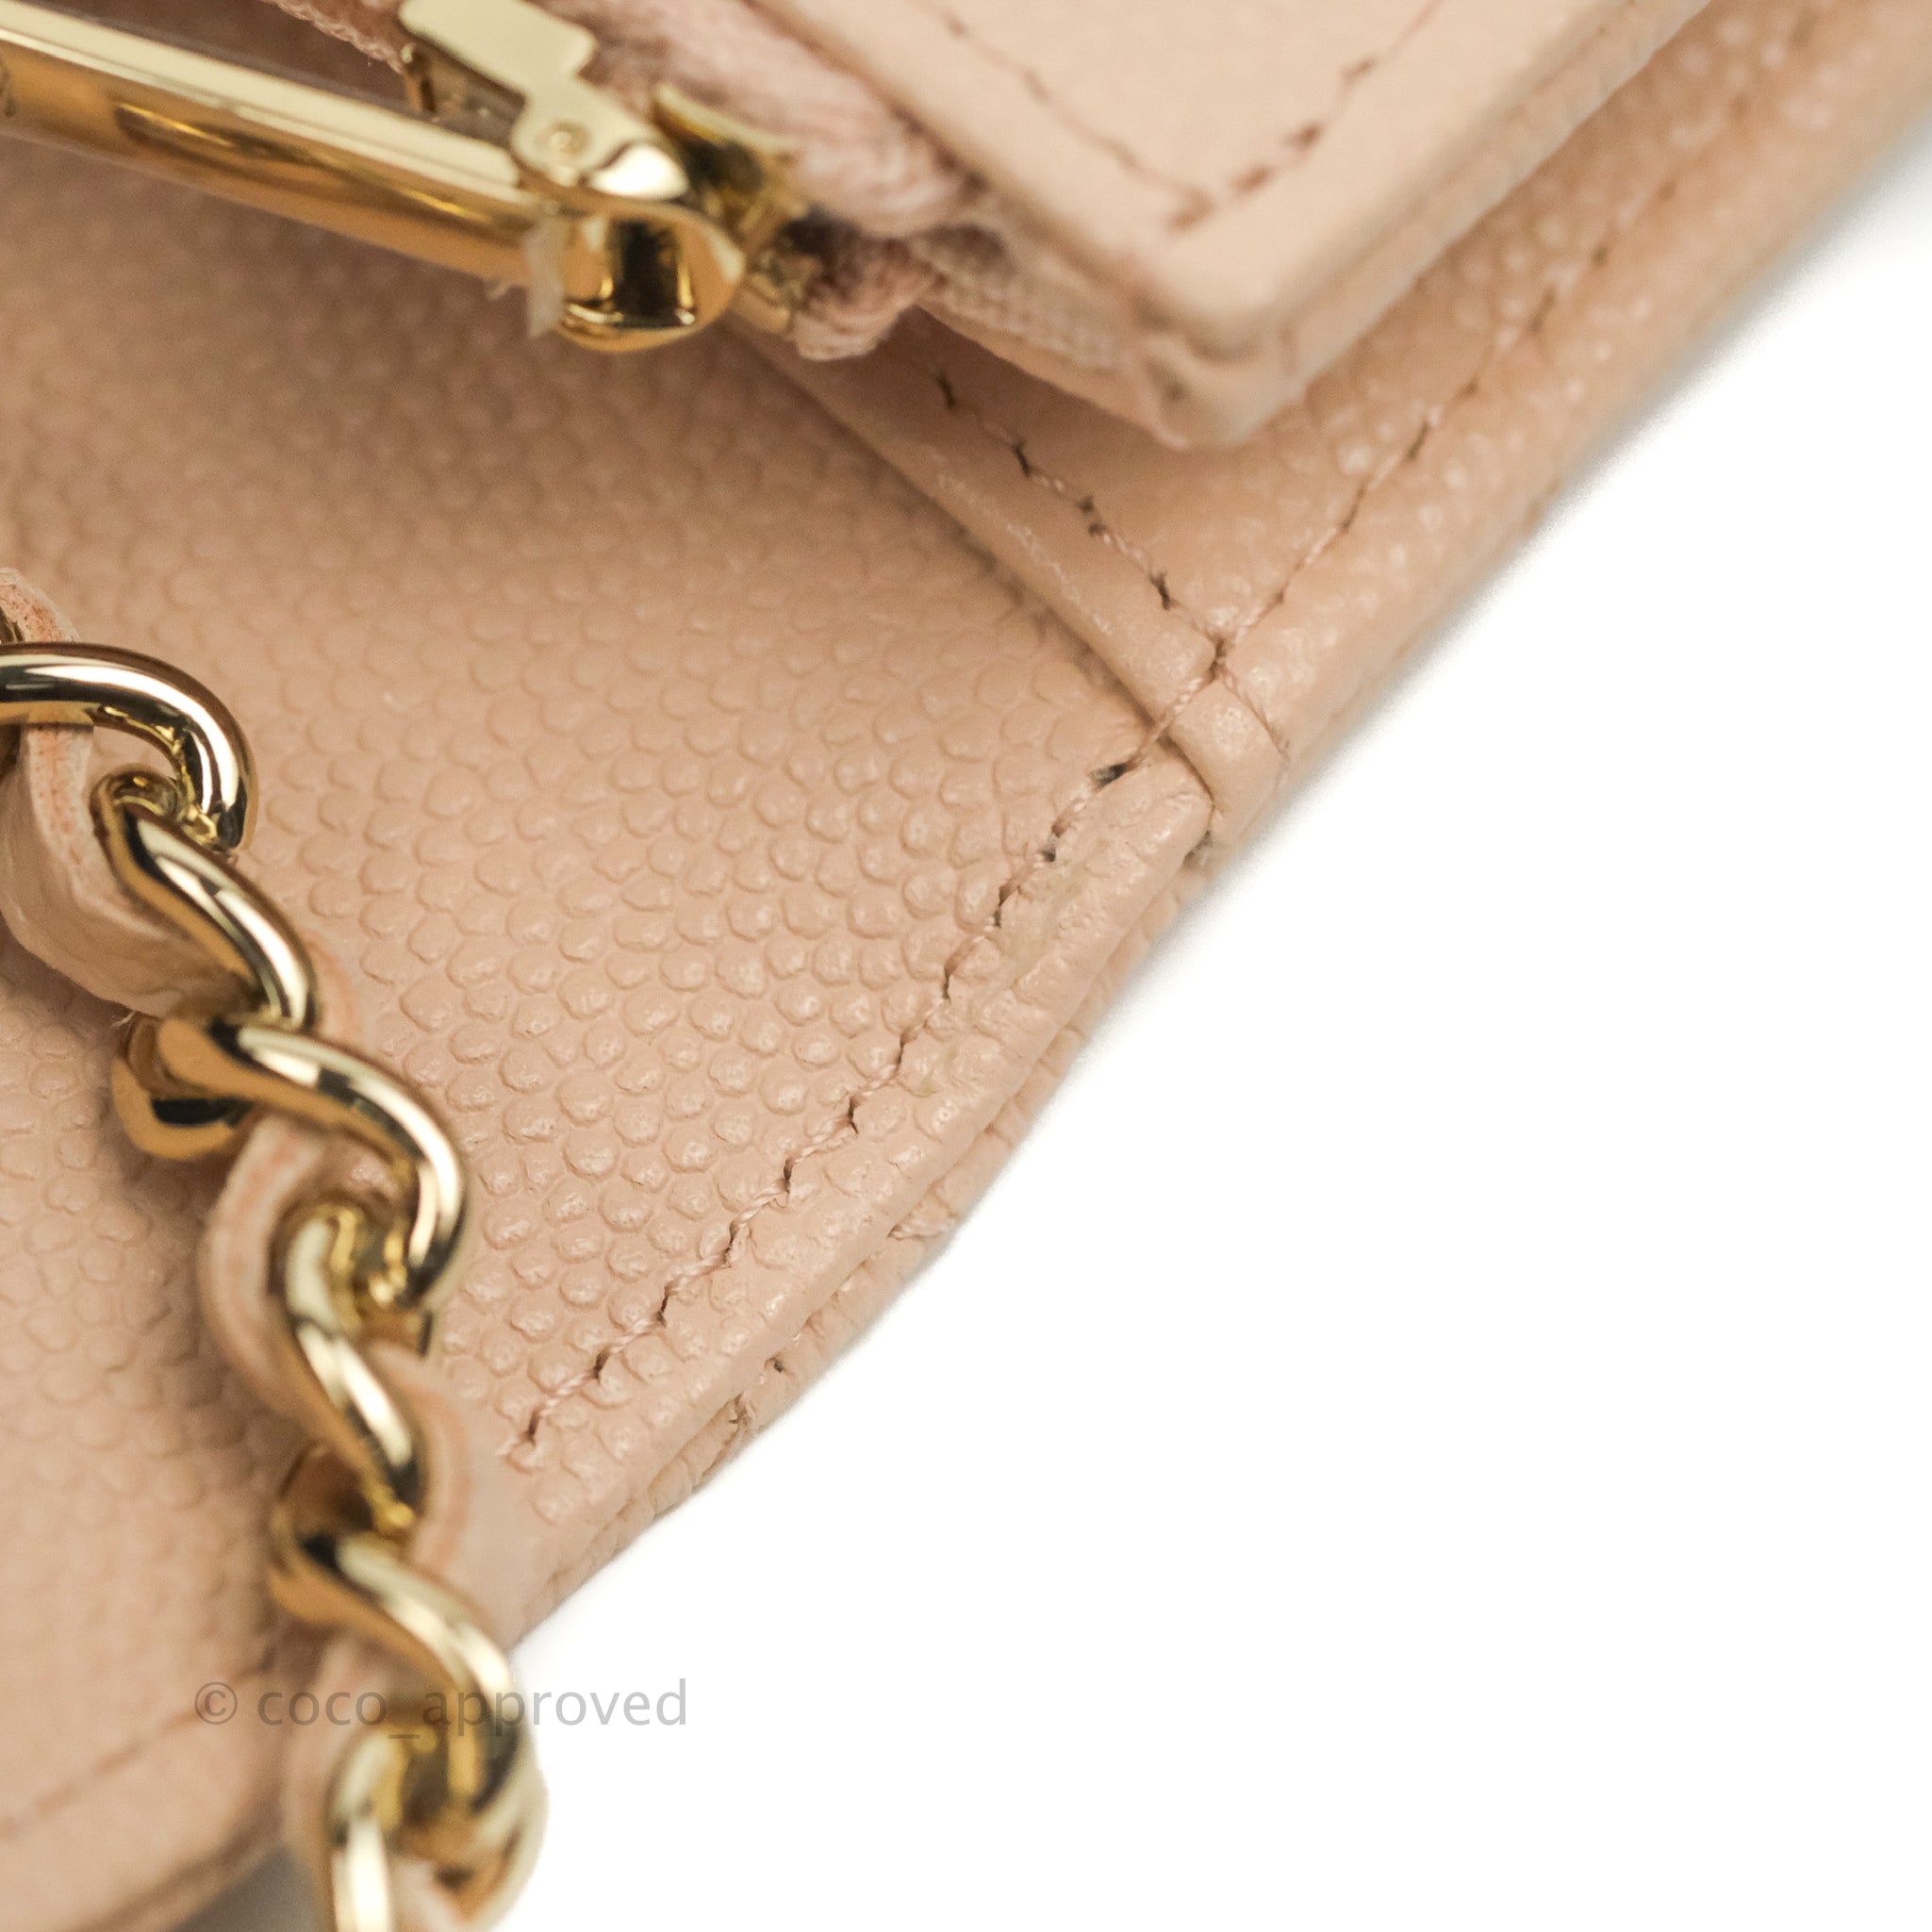 CHANEL, Bags, Chanel Beige Clair Caviar Wallet On Chain With Silver  Hardware Microchip Woc